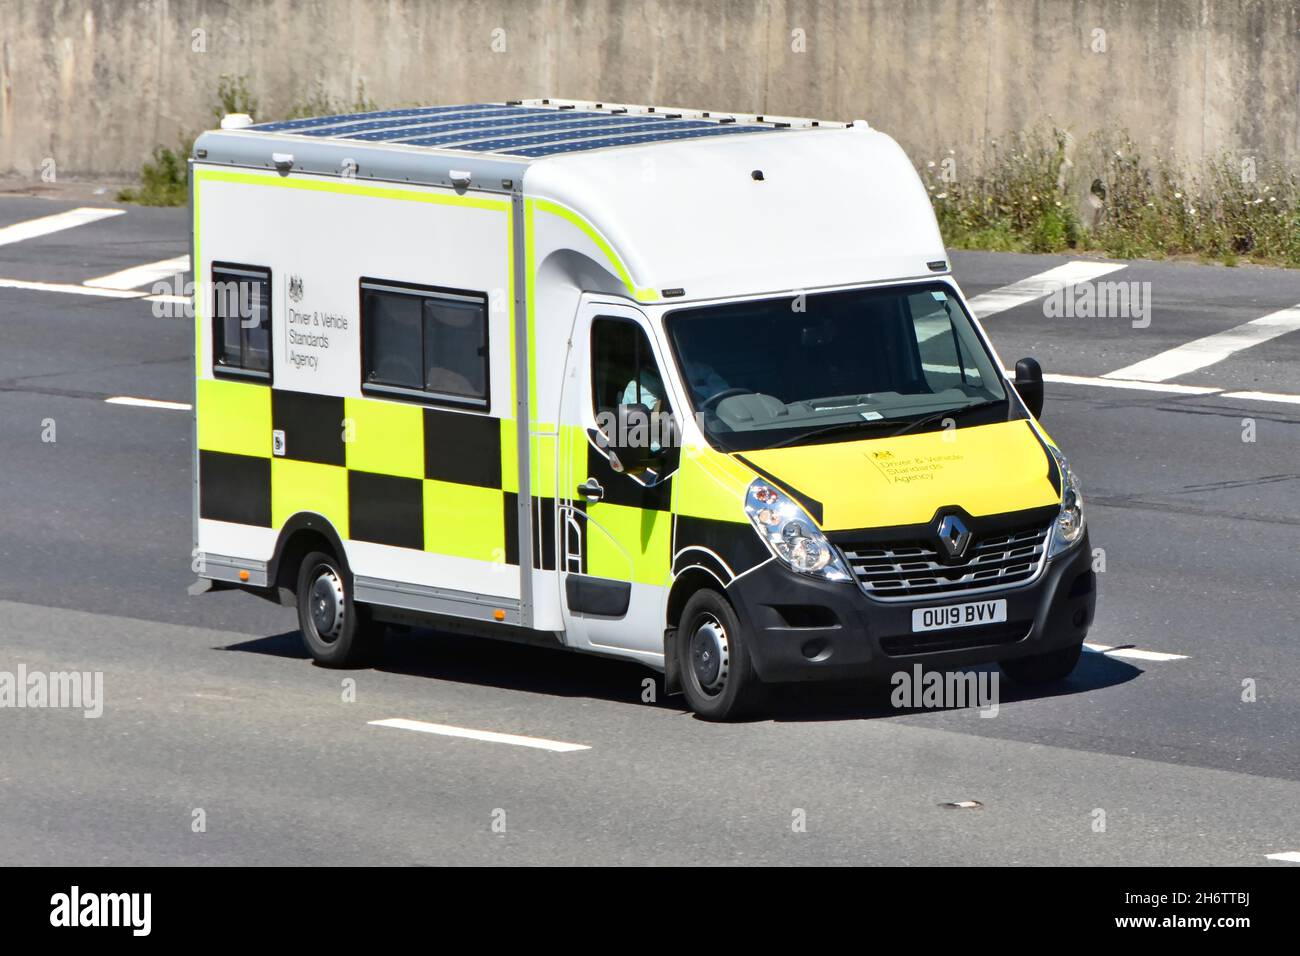 Side & front view Renault chassis cab van converted into mobile unit to accommodate staff of Driver & Vehicle Standards Agency driving on UK motorway Stock Photo